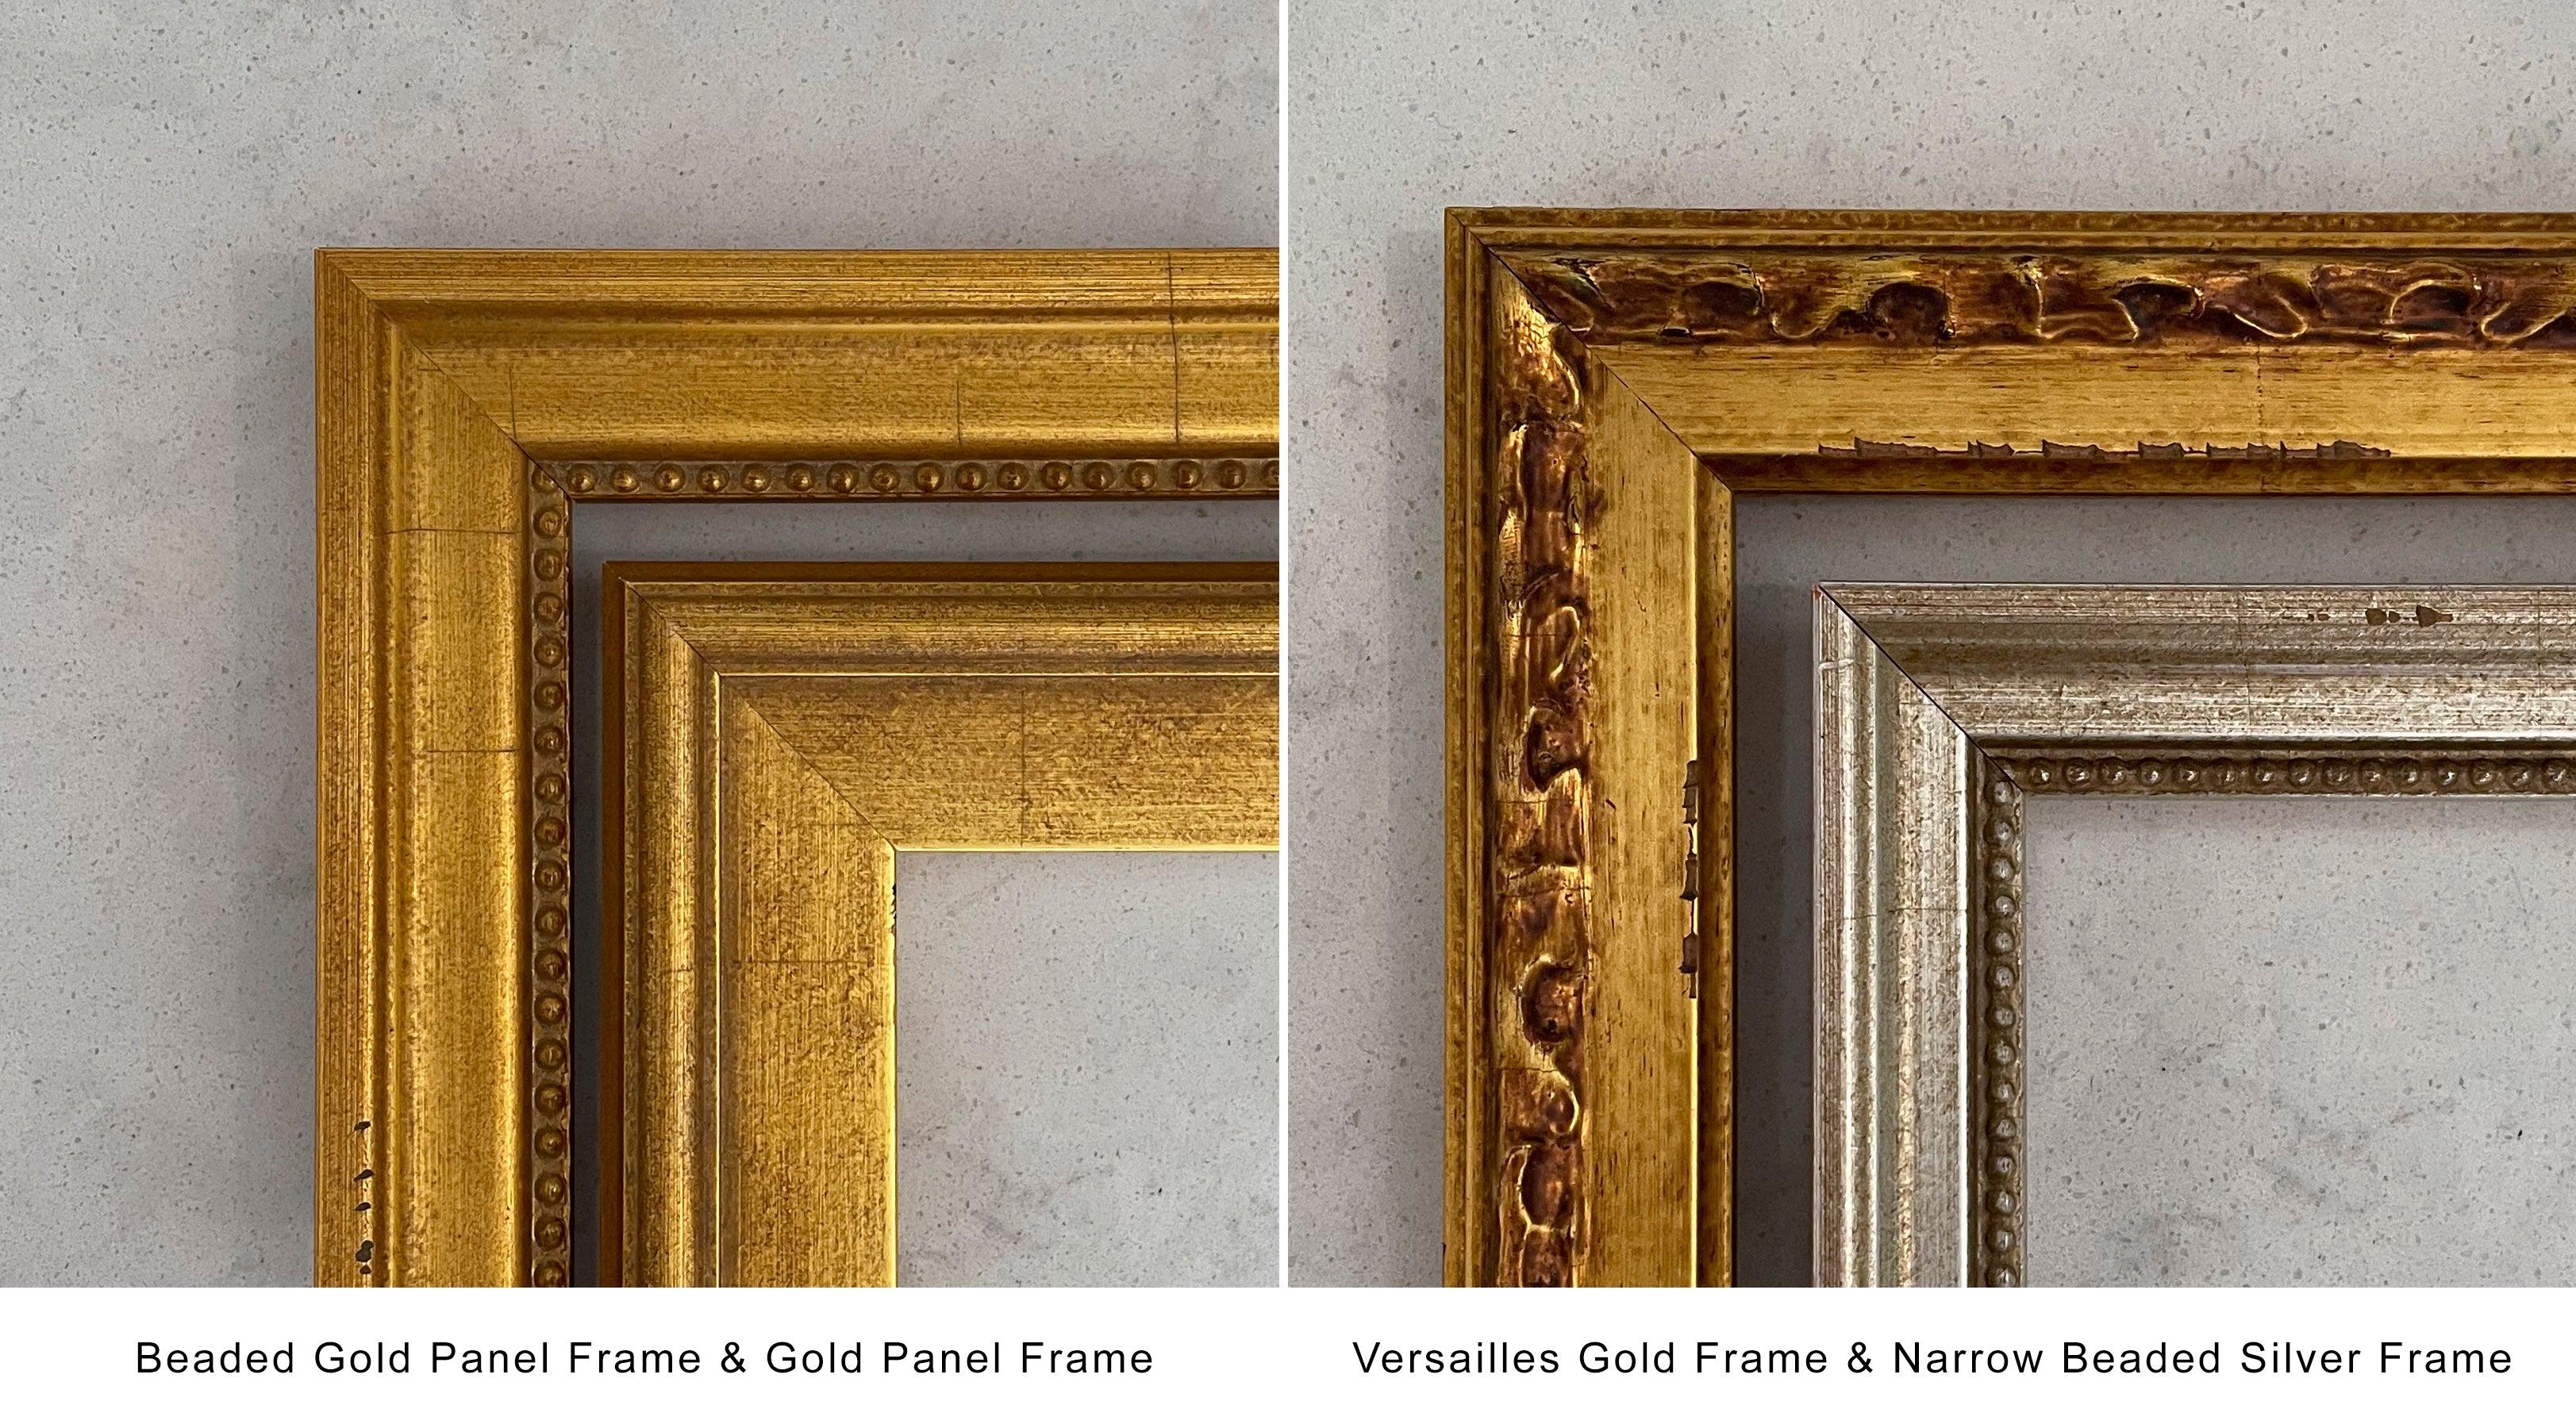 Beaded Gold and Gold Panel Frames